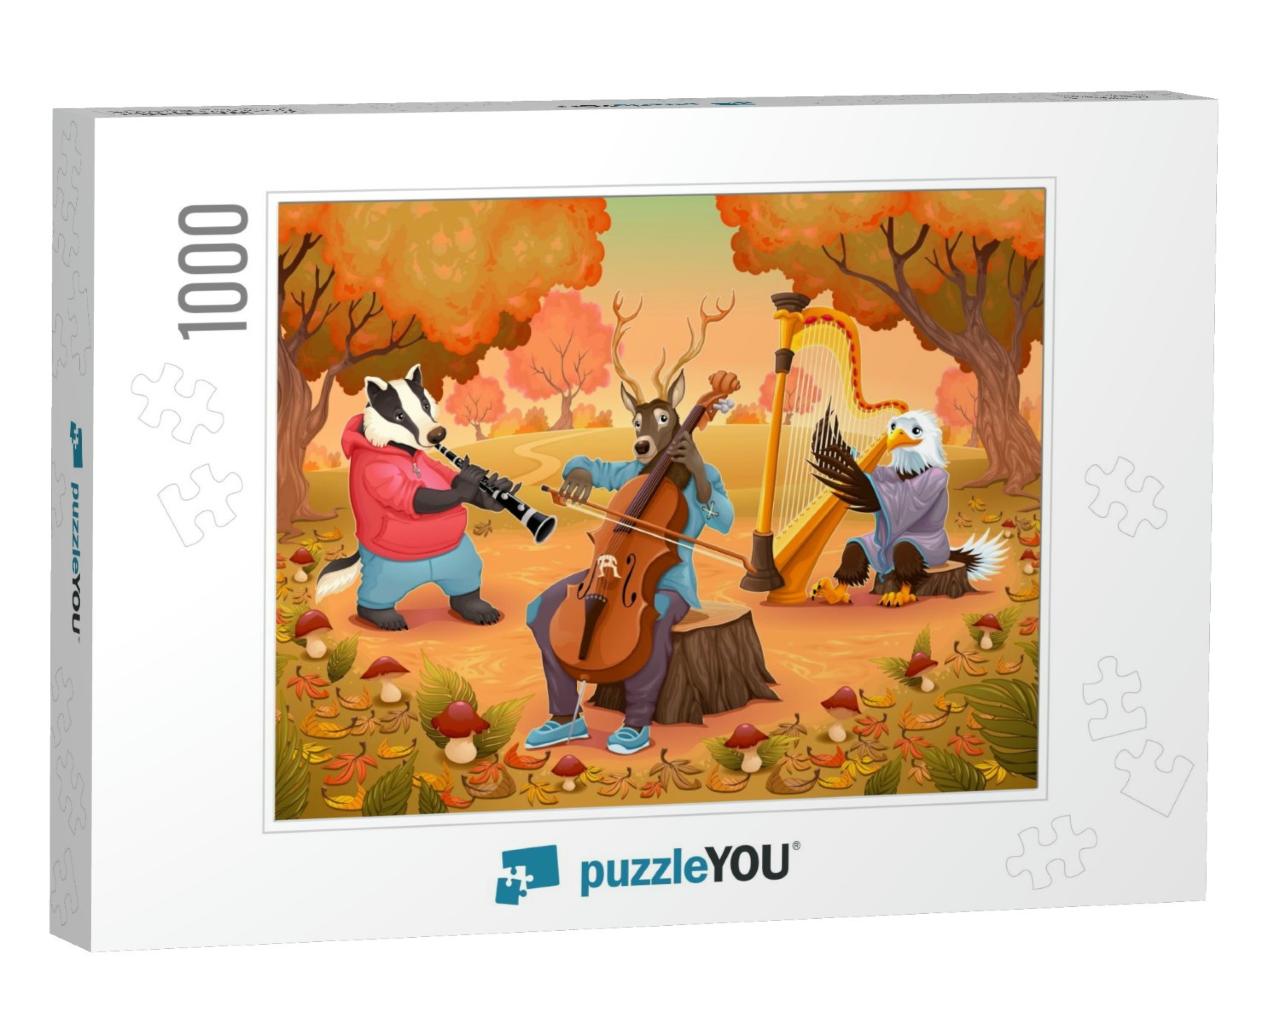 Musician Animals in the Wood. Cartoon & Vector Illustrati... Jigsaw Puzzle with 1000 pieces